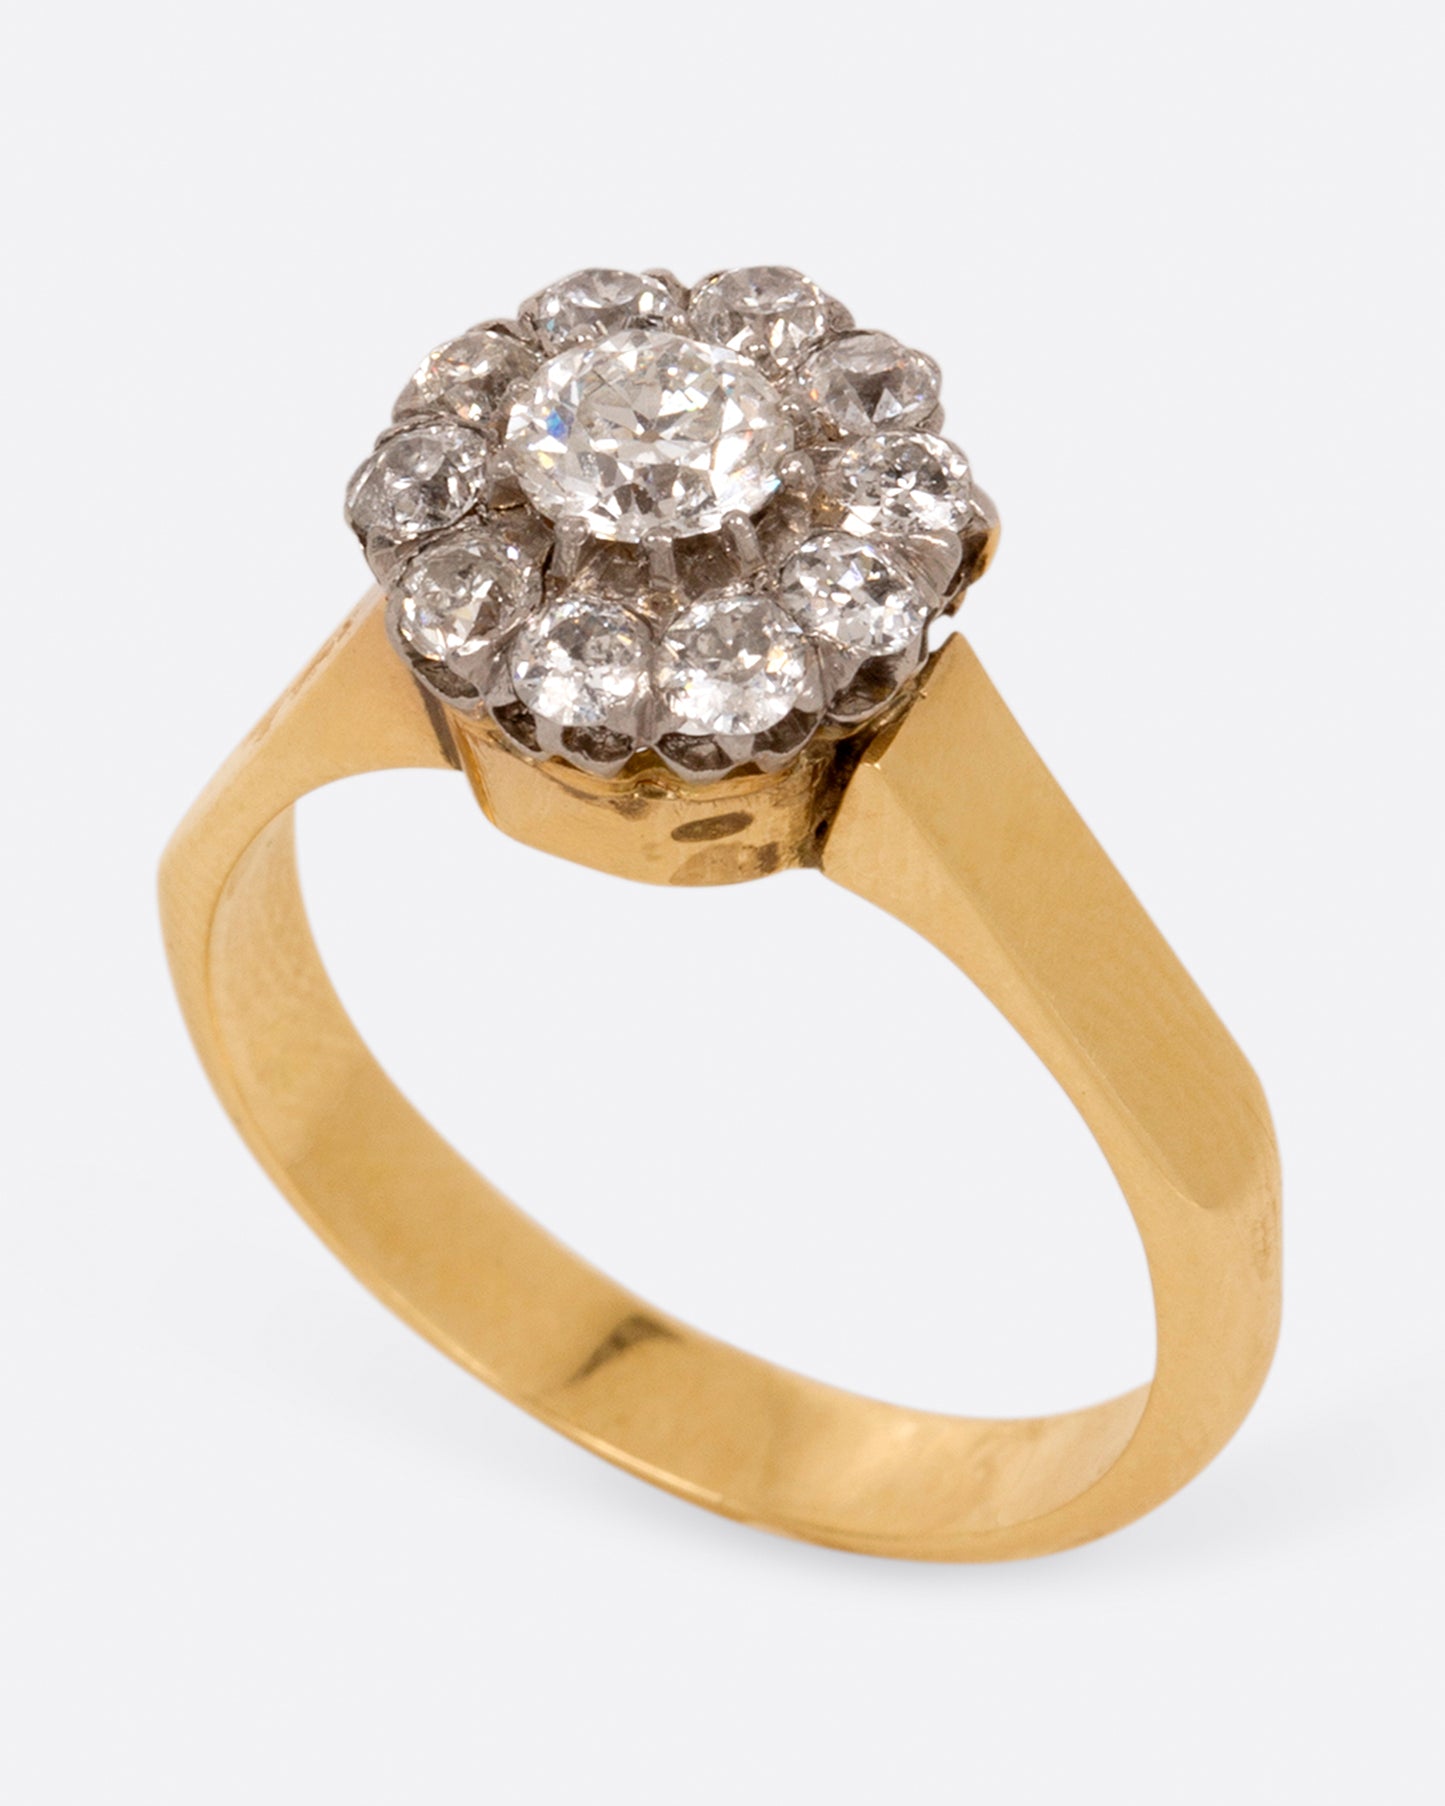 A wide flat yellow gold ring with a flower-shaped cluster of diamonds, shown standing from the side.